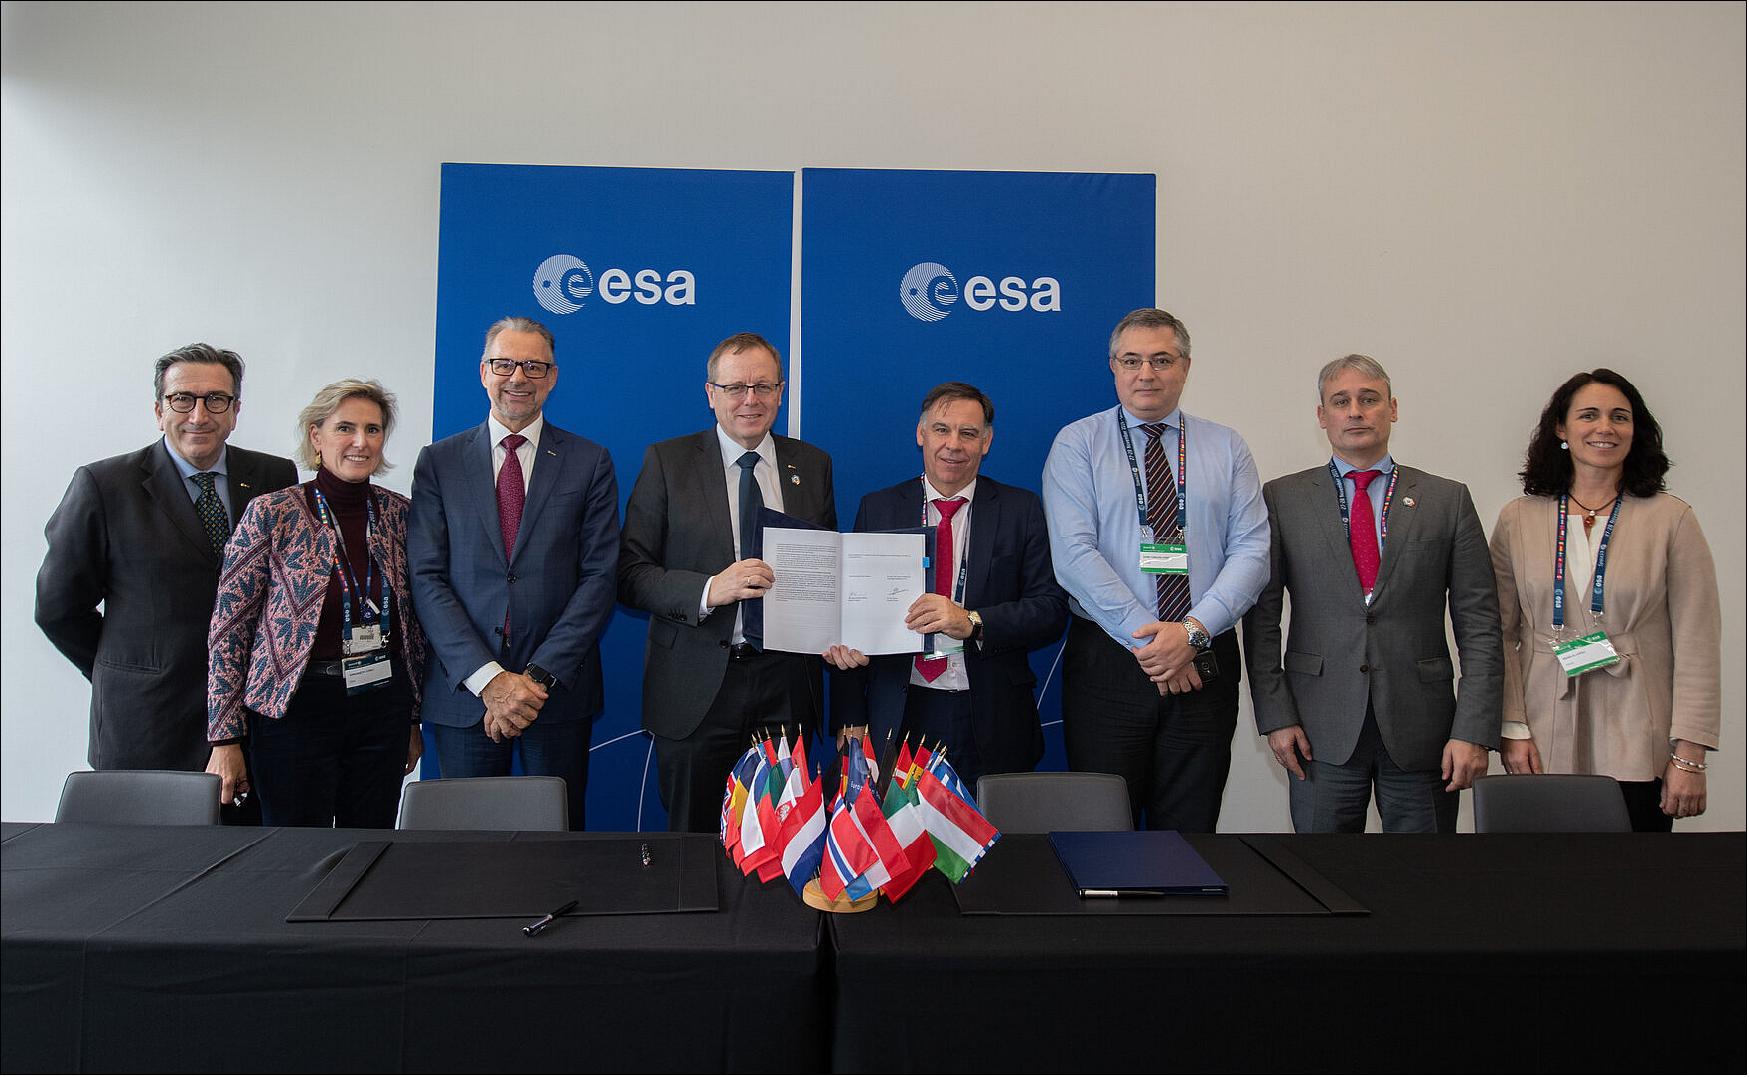 Figure 9: ESA and CDTI have signed an understanding that will boost Spain’s access to Copernicus Sentinel data. Under the agreement, Spain will establish a national data center which will source its data directly from a dedicated distribution point that is reserved for ESA Member States and Copernicus Participating States. ESA will also provide technical support to ensure the national center benefits from the enhanced download capabilities. The understanding was signed by Jan Wörner (center left), Director General of ESA, and by Javier Ponce (center right), Director General of CDTI (image credit: ESA)